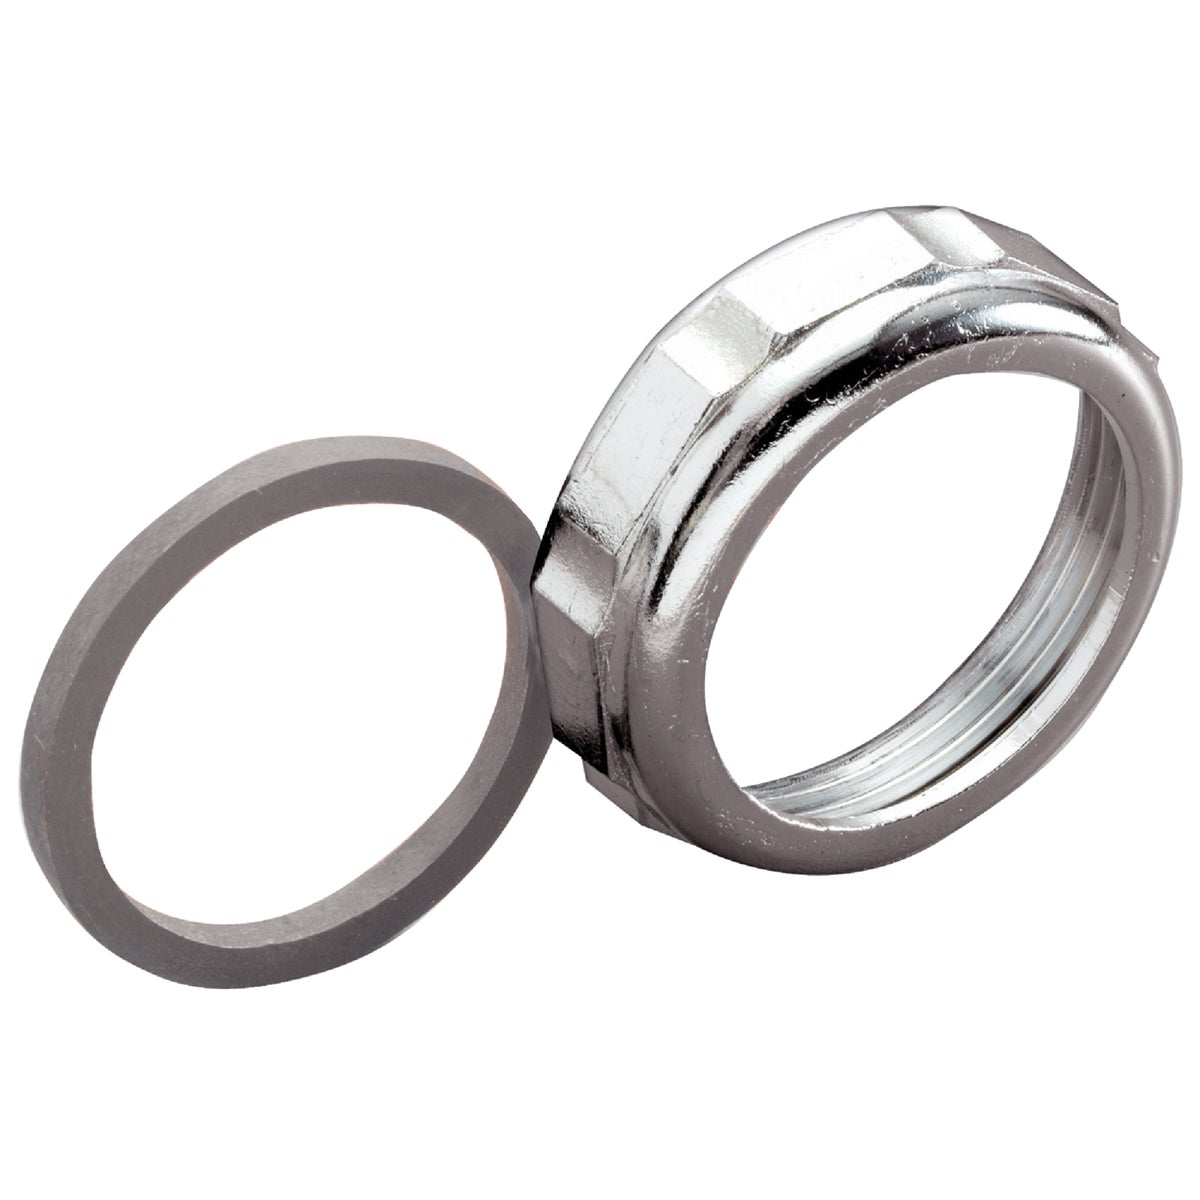 Do it 1-1/2 In. x 1-1/4 In. Chrome Zinc Slip Joint Nut and Washer